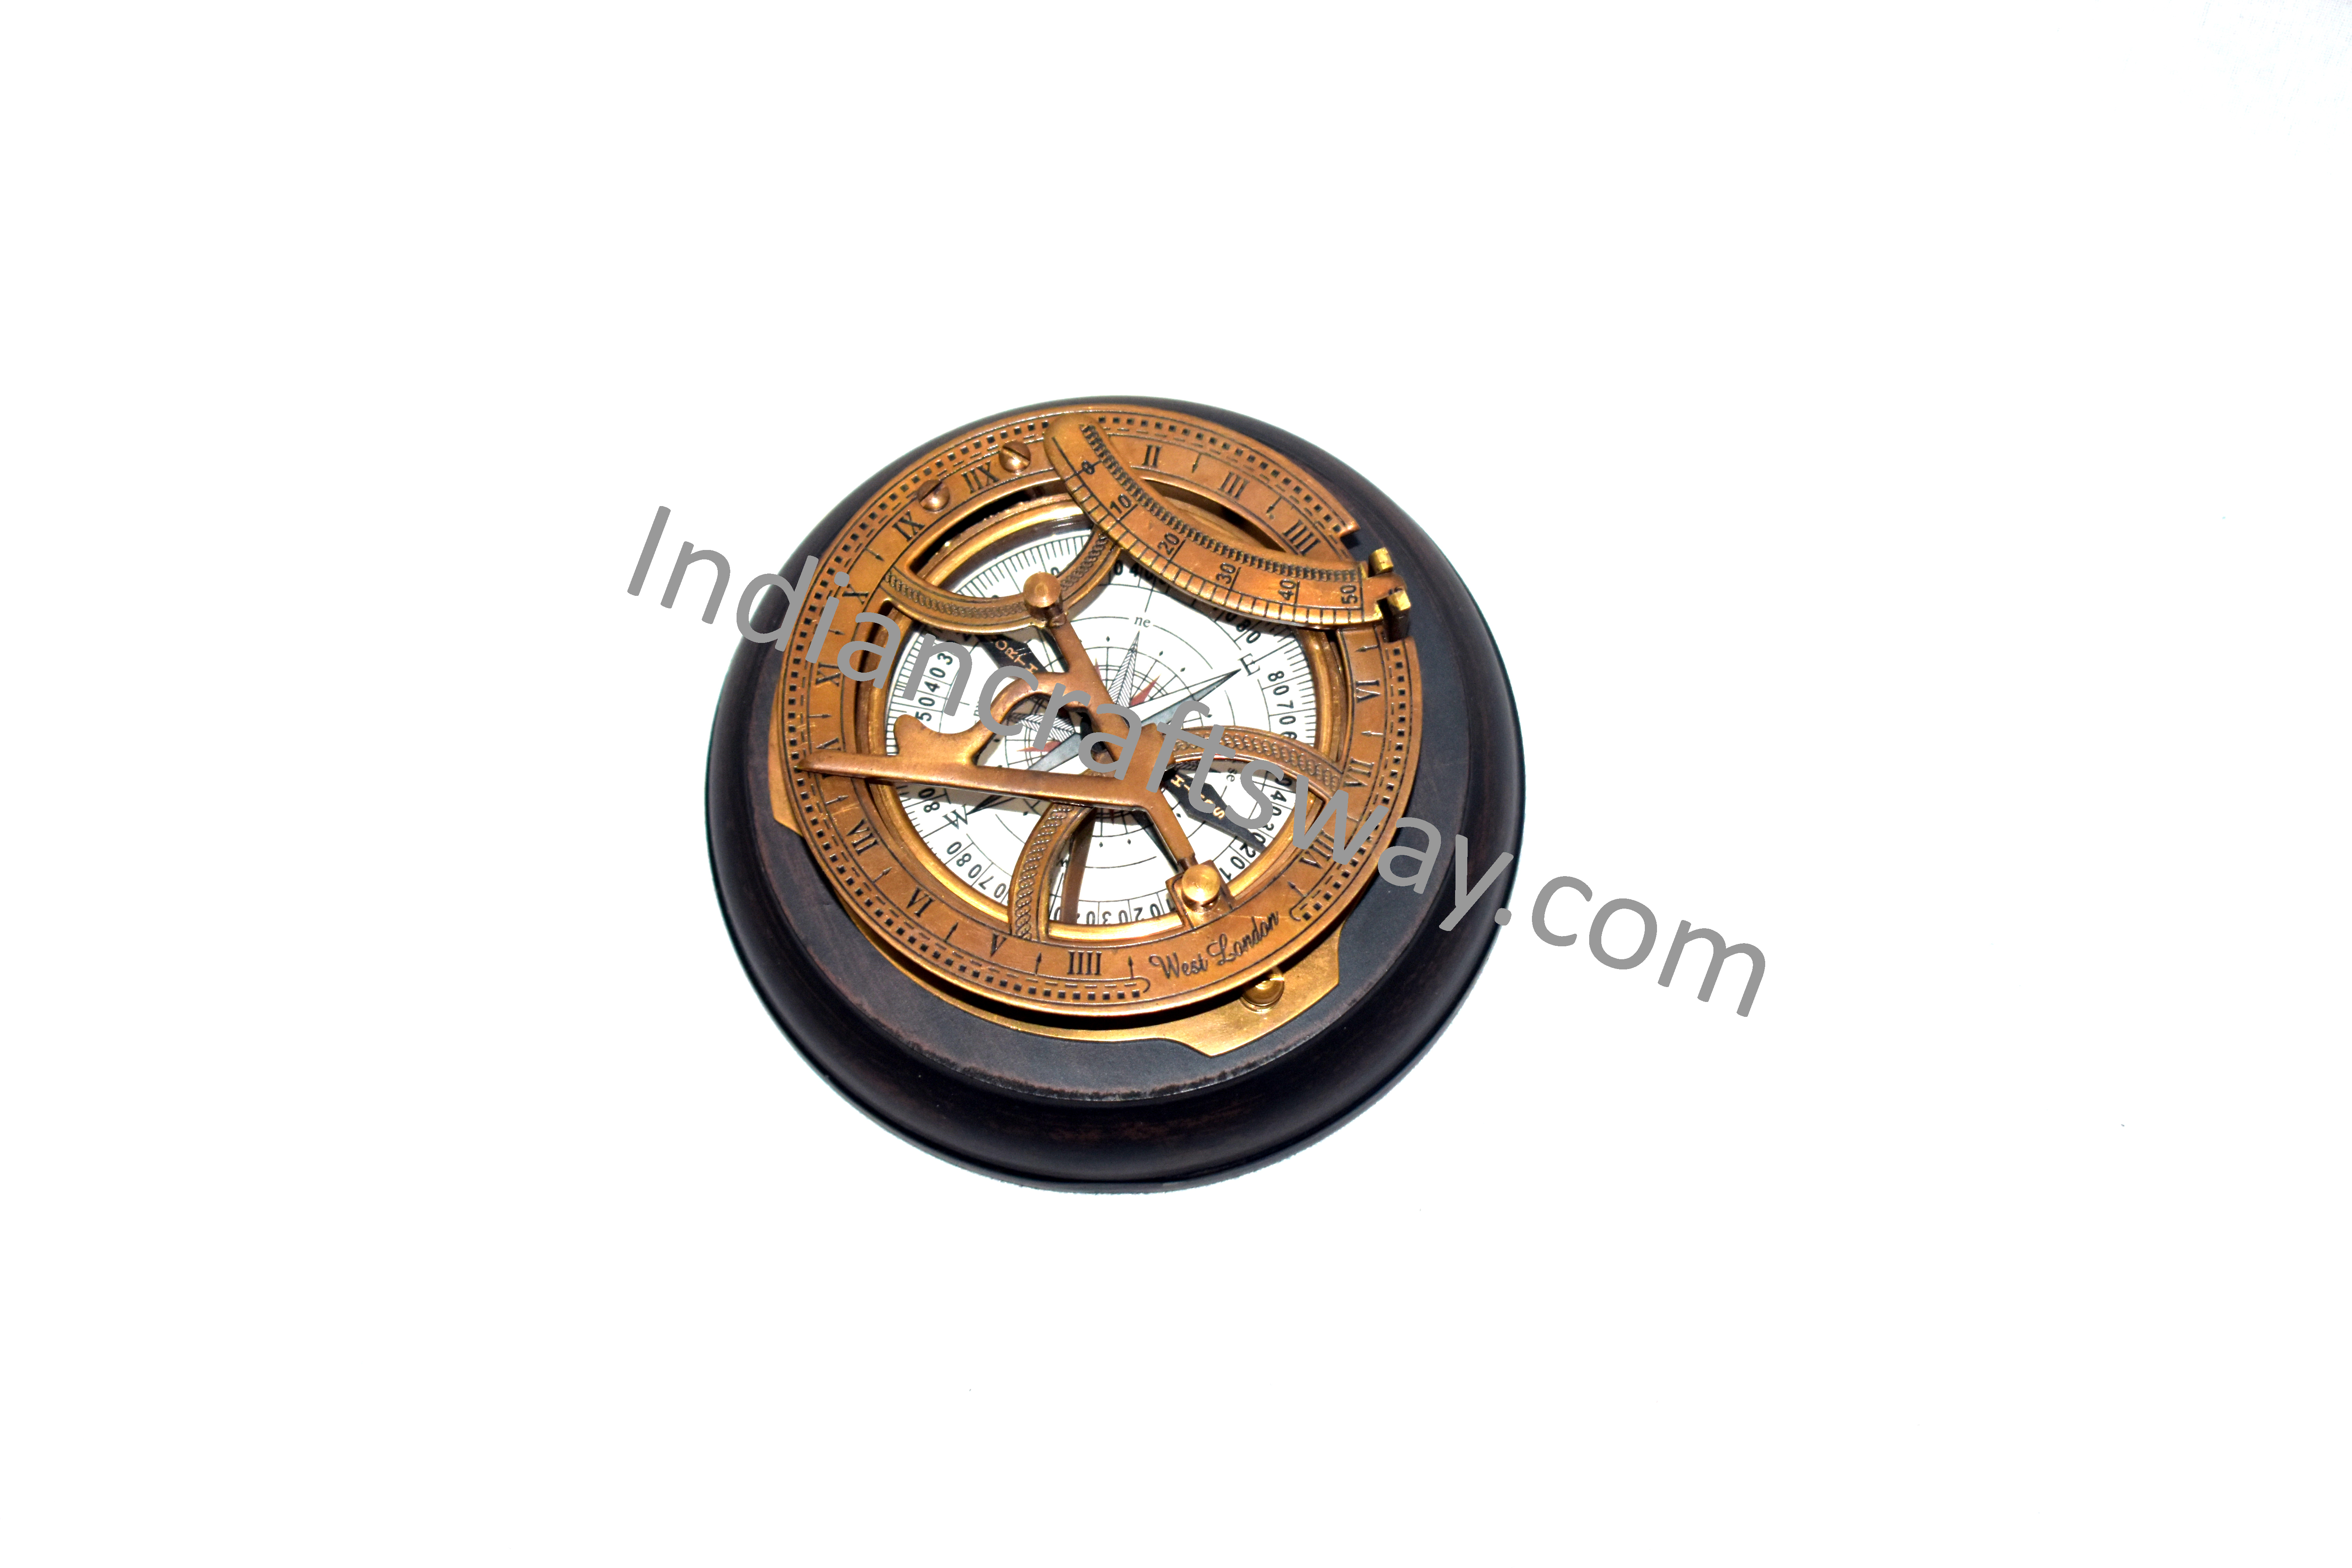 Antique Brass Sundial Compass With Wooden Box Ba Finish